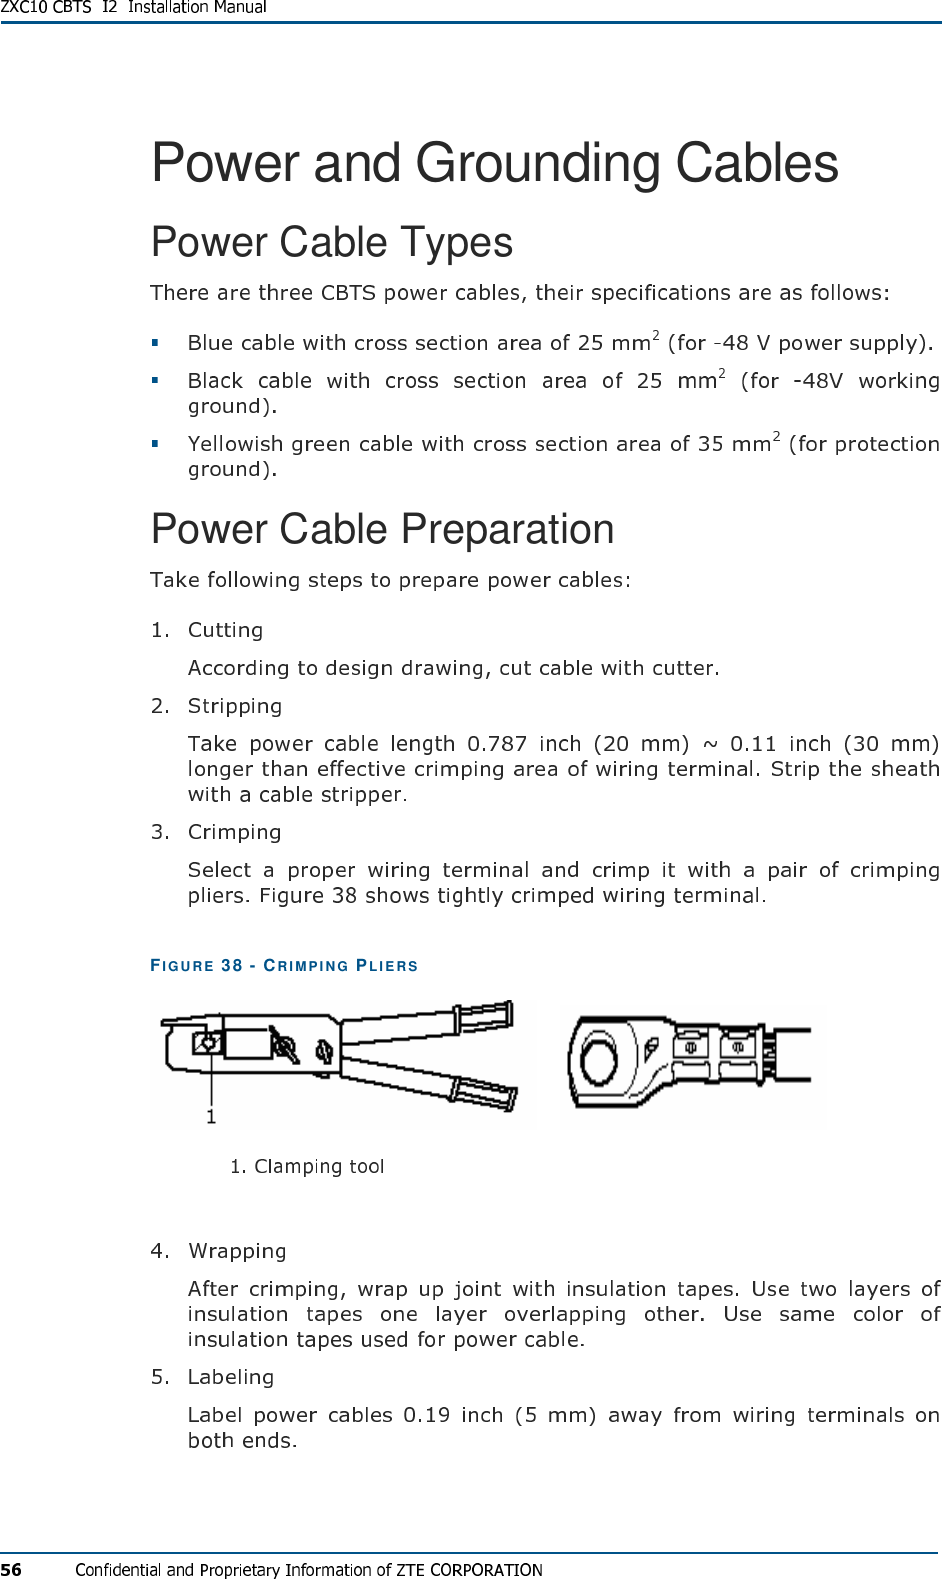 Power and Grounding Cables Power Cable Types    Power Cable Preparation    FIG U R E   38 - CR IM PI NG  PL I E R S        